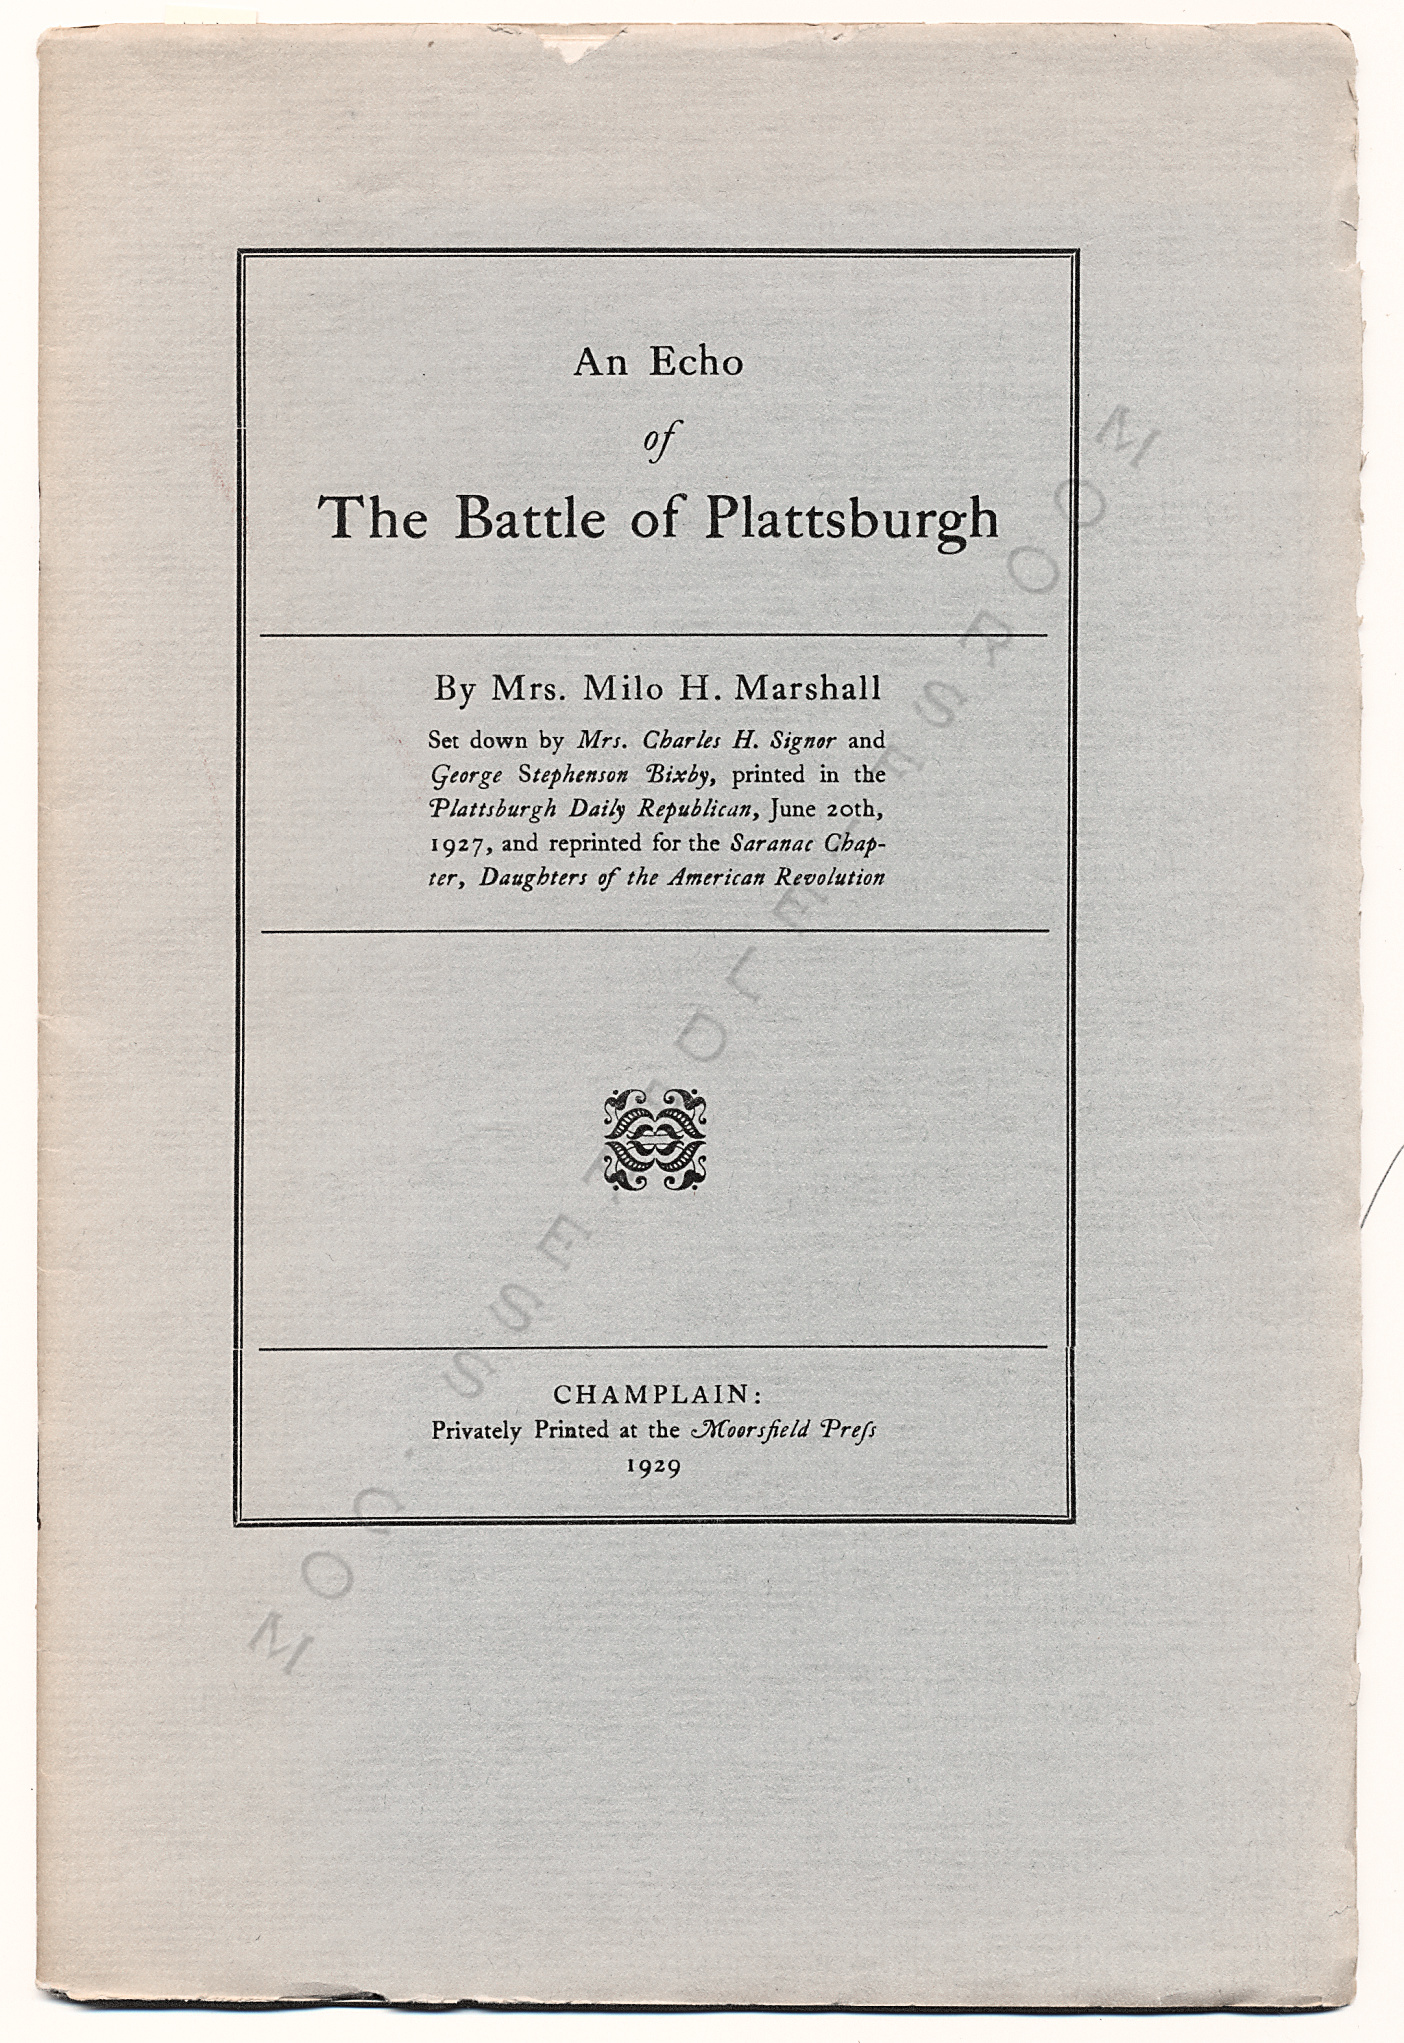 An Echo of
                      the Battle of Plattsburgh by Mrs. Milo H.
                      Marshall